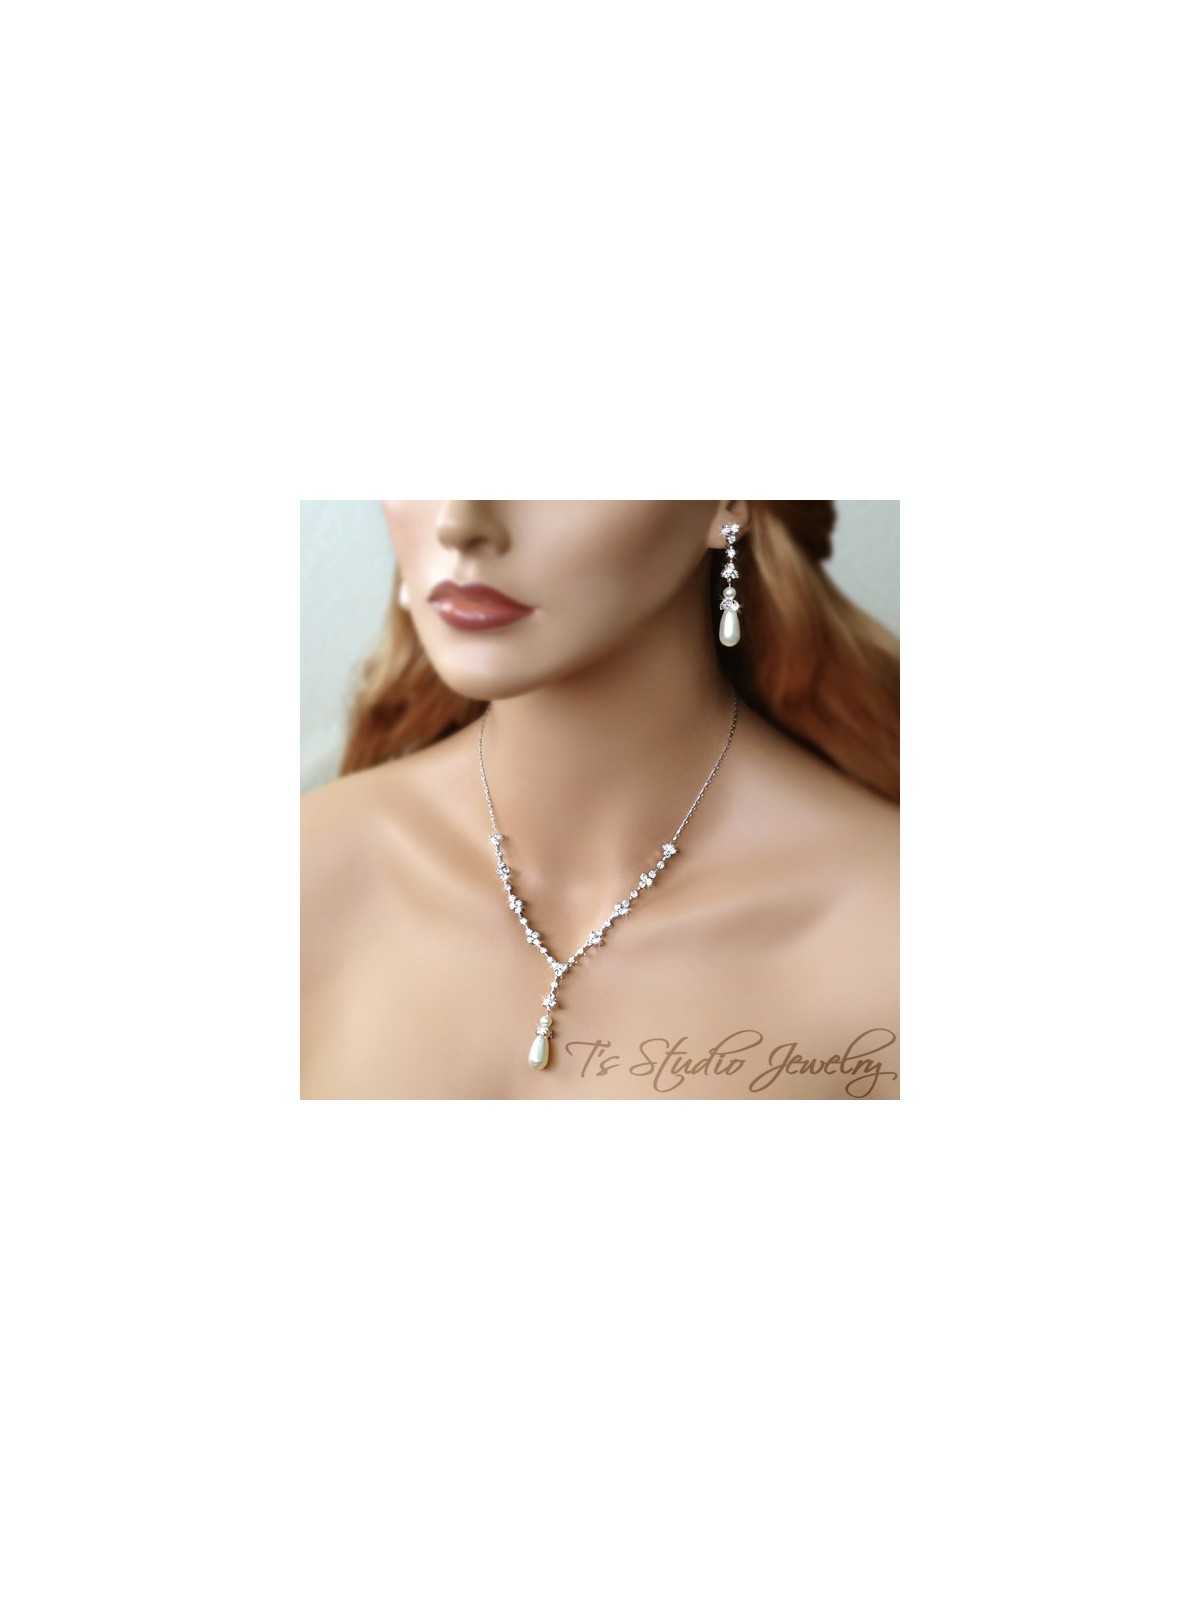 Teardrop Pearl Bridal Necklace and Earrings Set